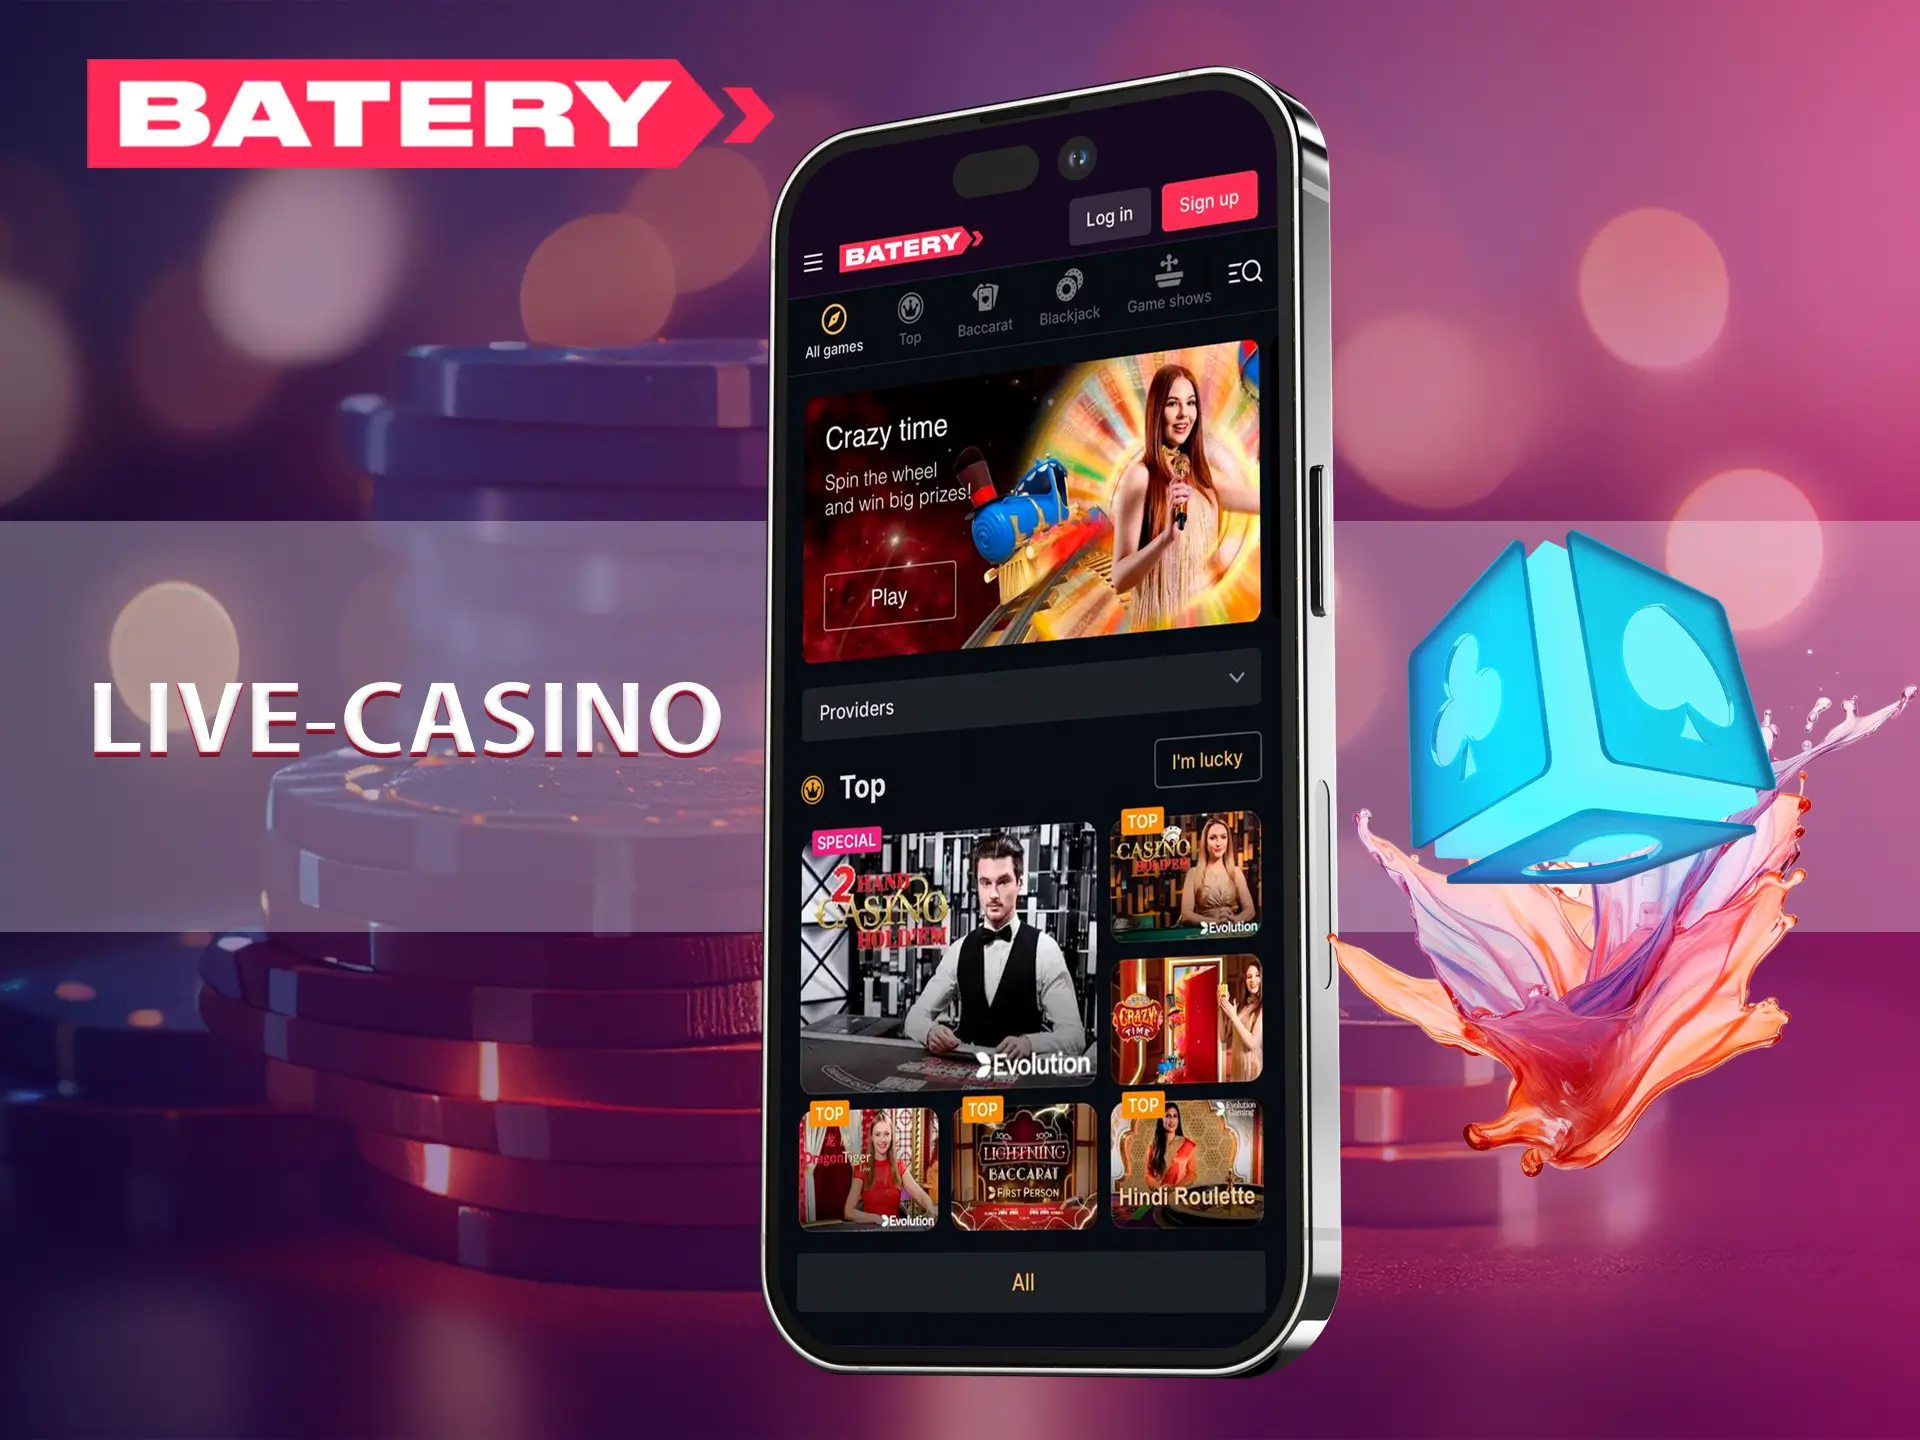 Put your skills to use in card games with Batery Casino dealers.